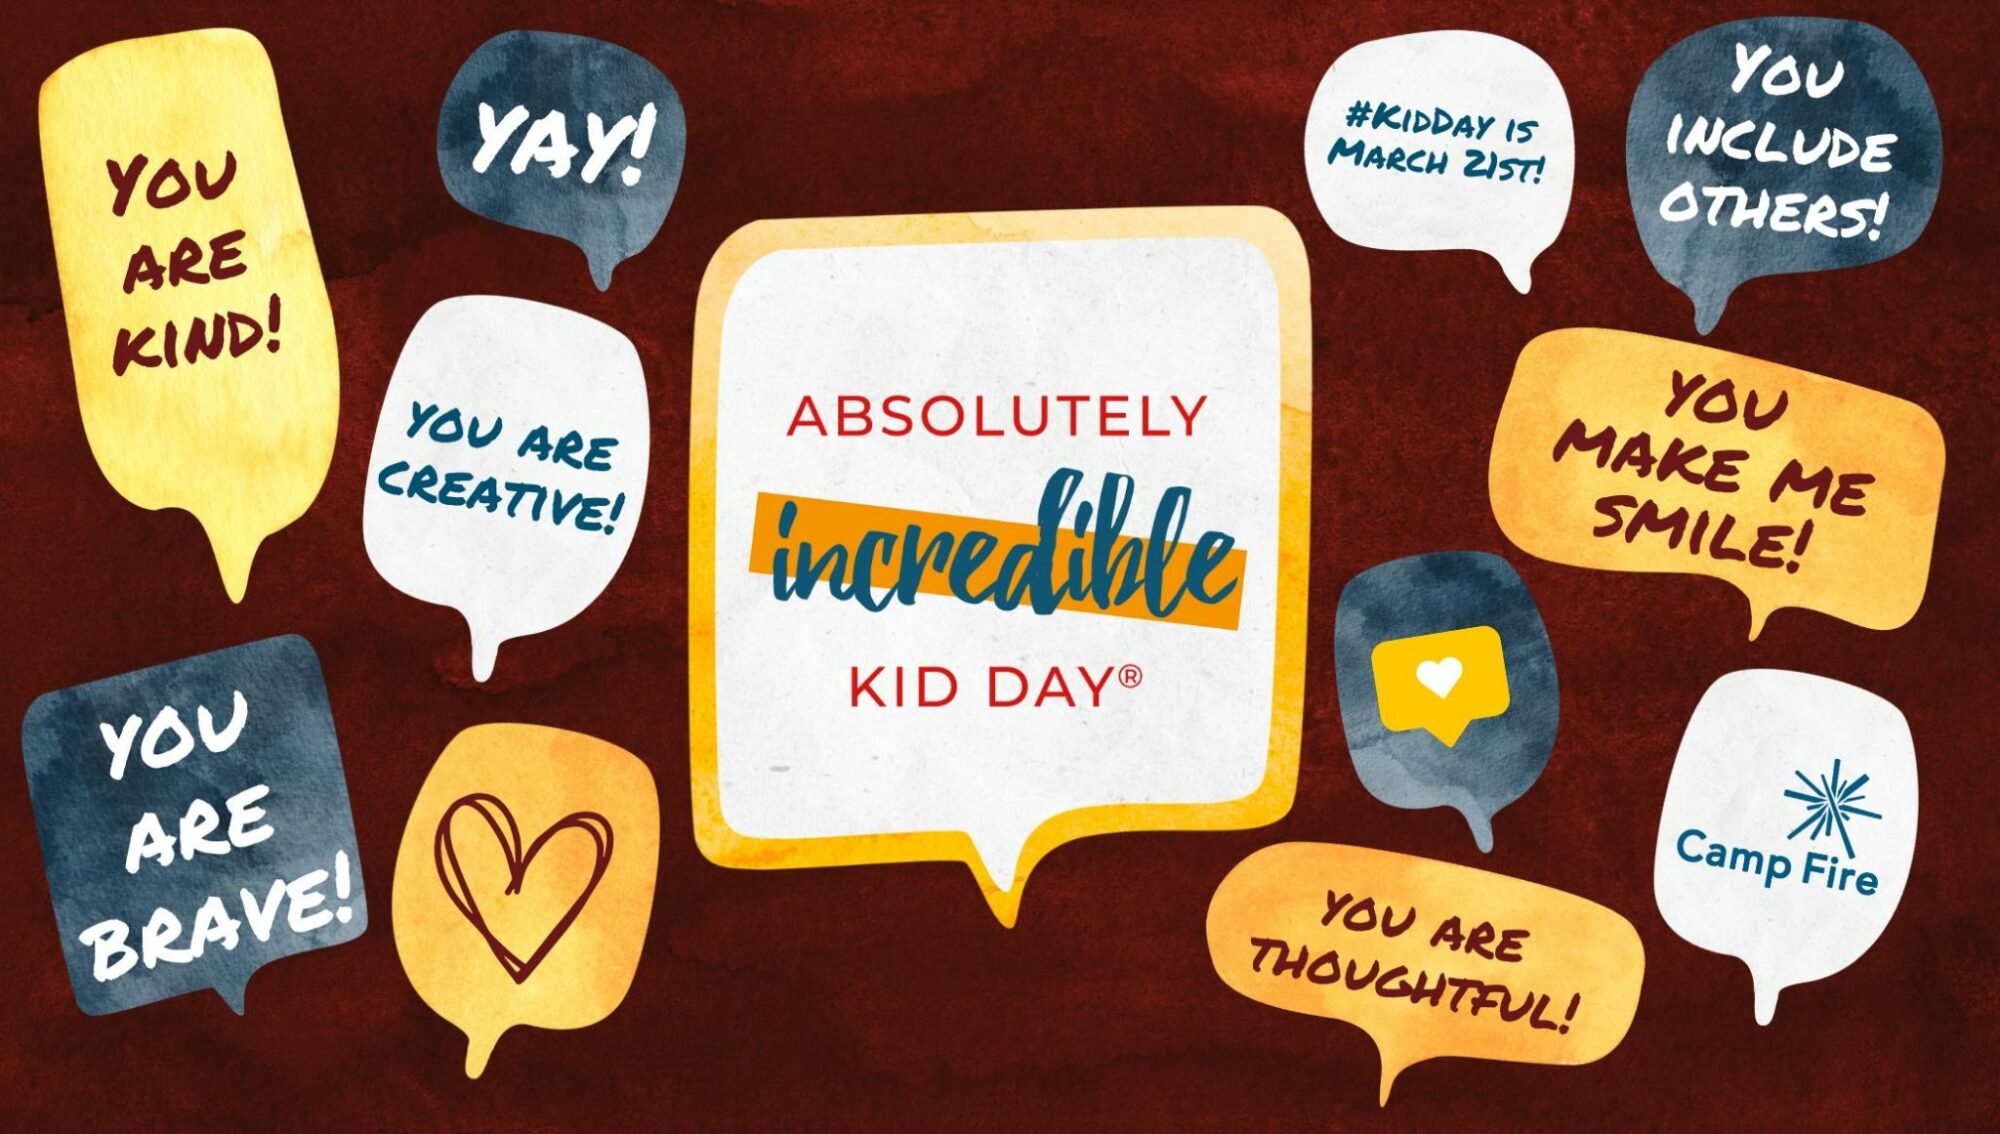 Absolutely Incredible Kid Day Blog Header